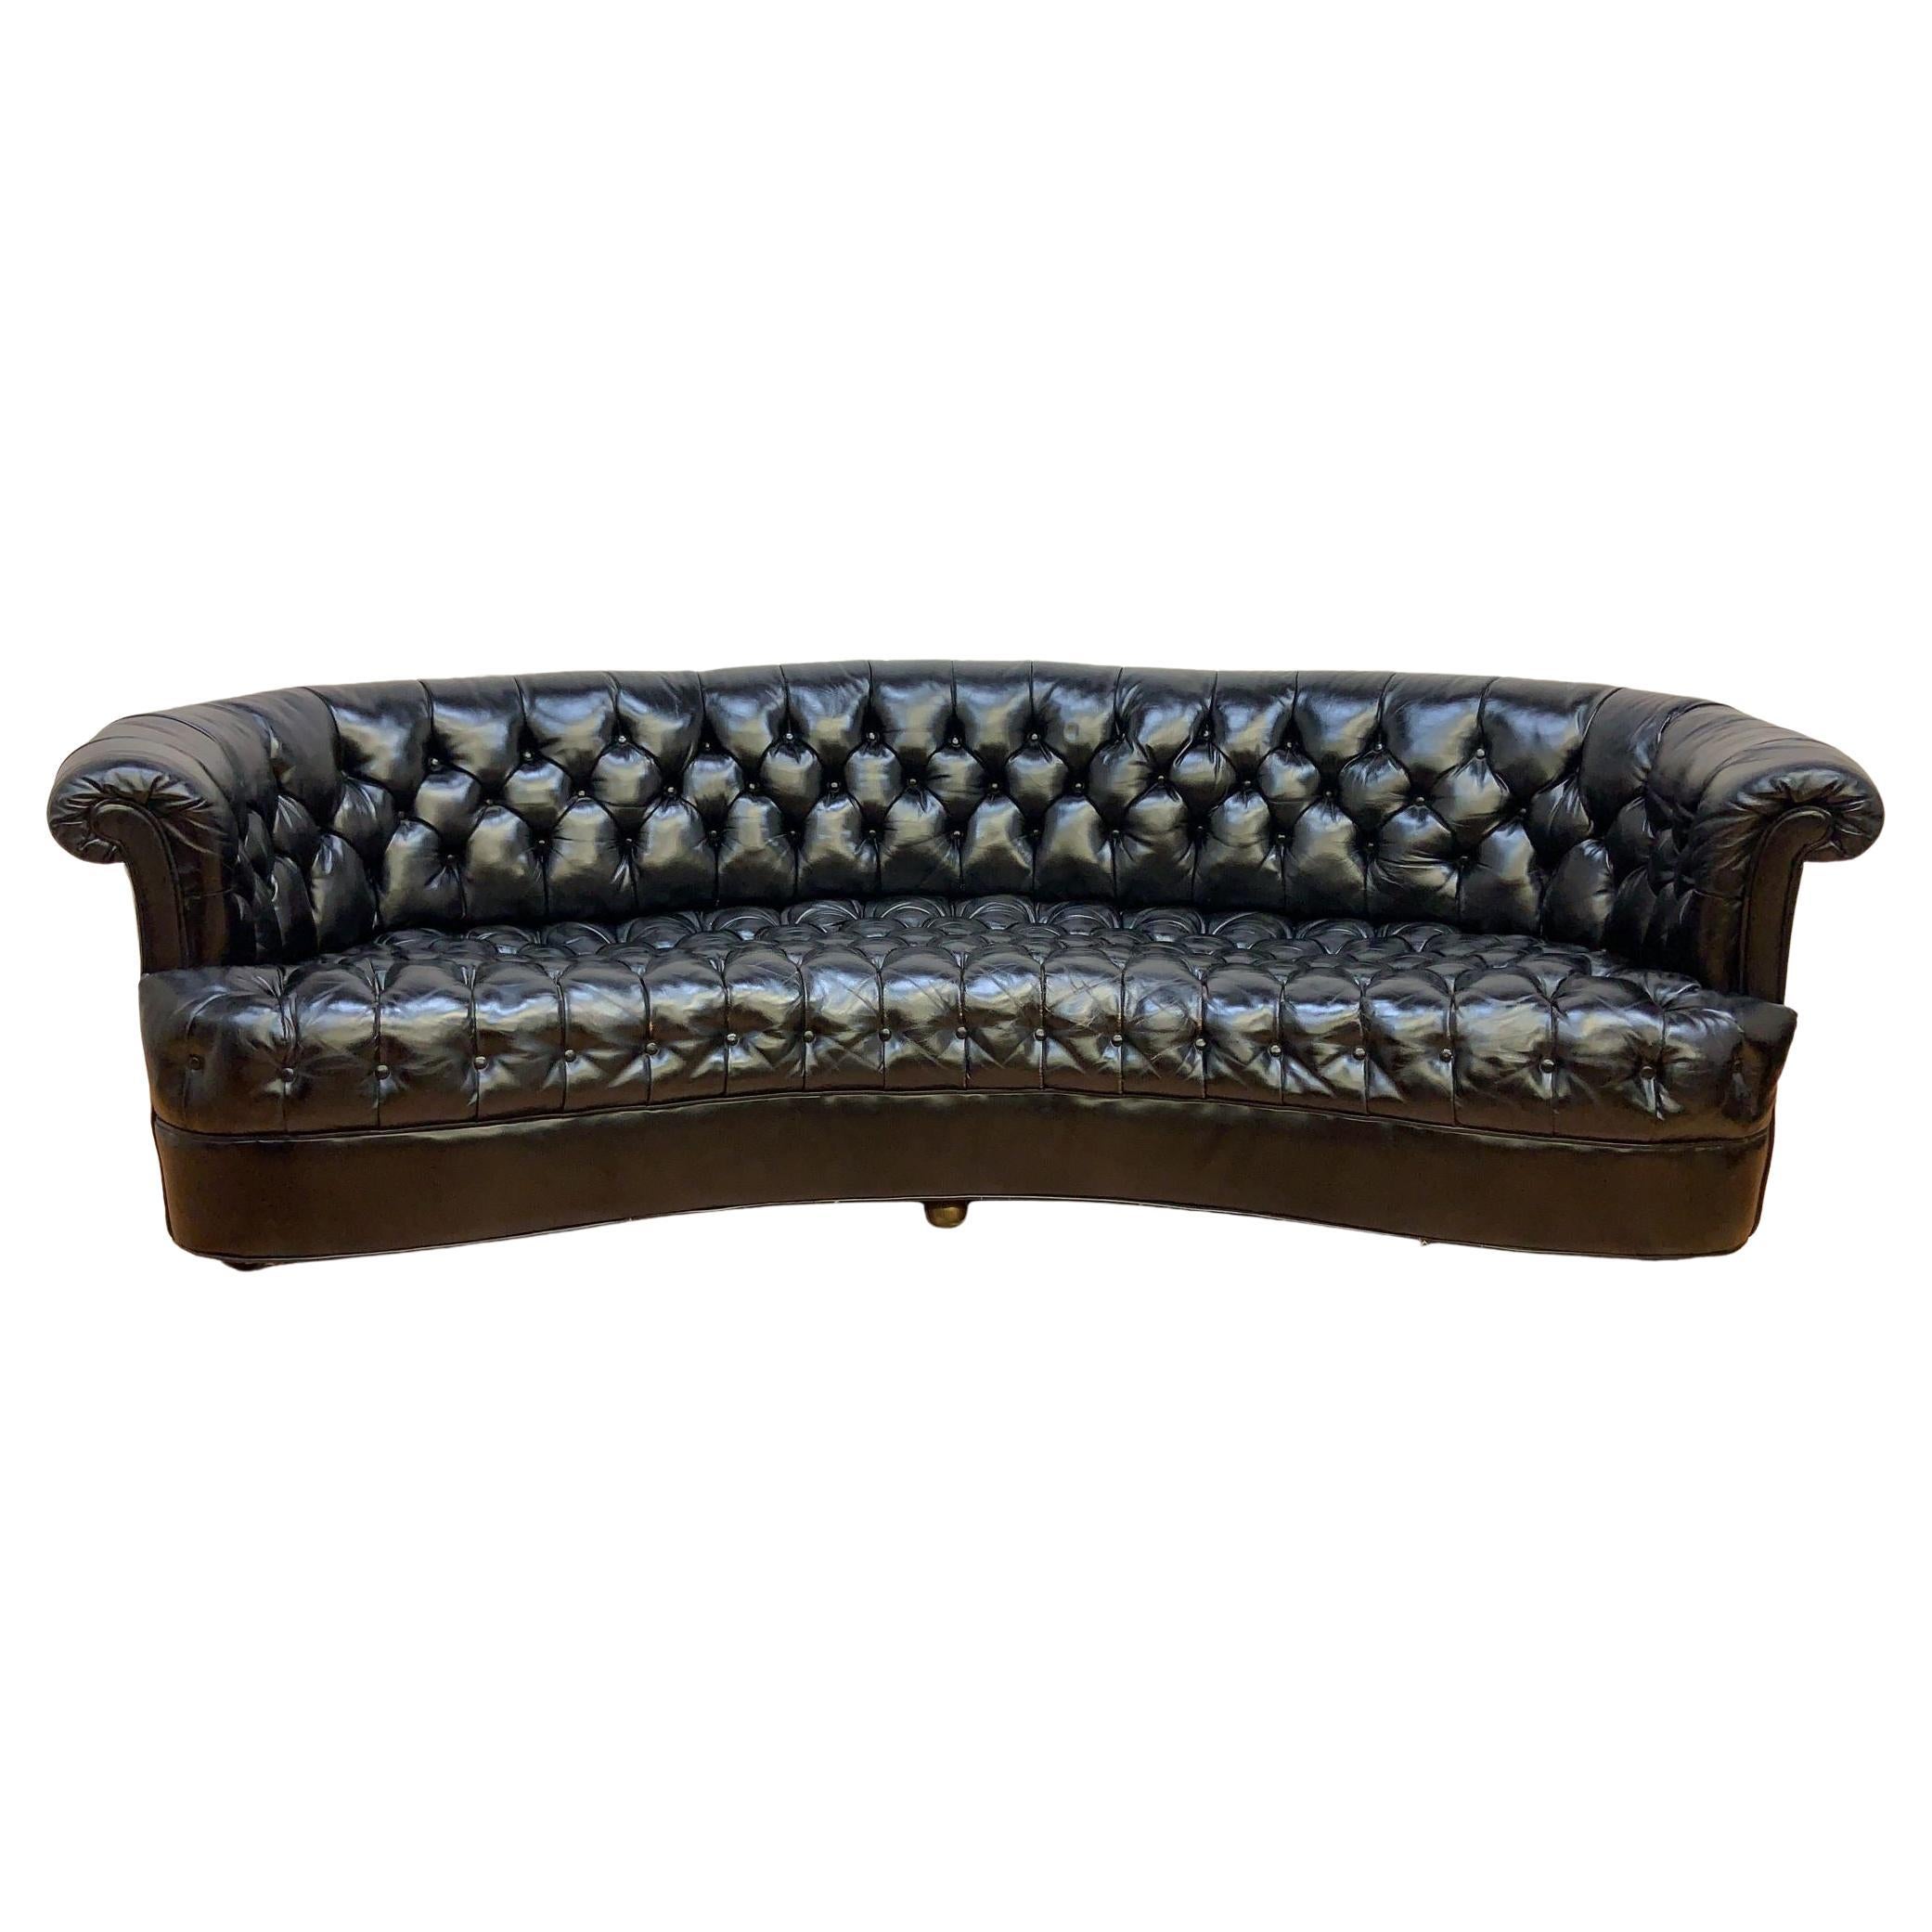 Vintage Chesterfield Style Curved Back Black Leatherette Sofa For Sale